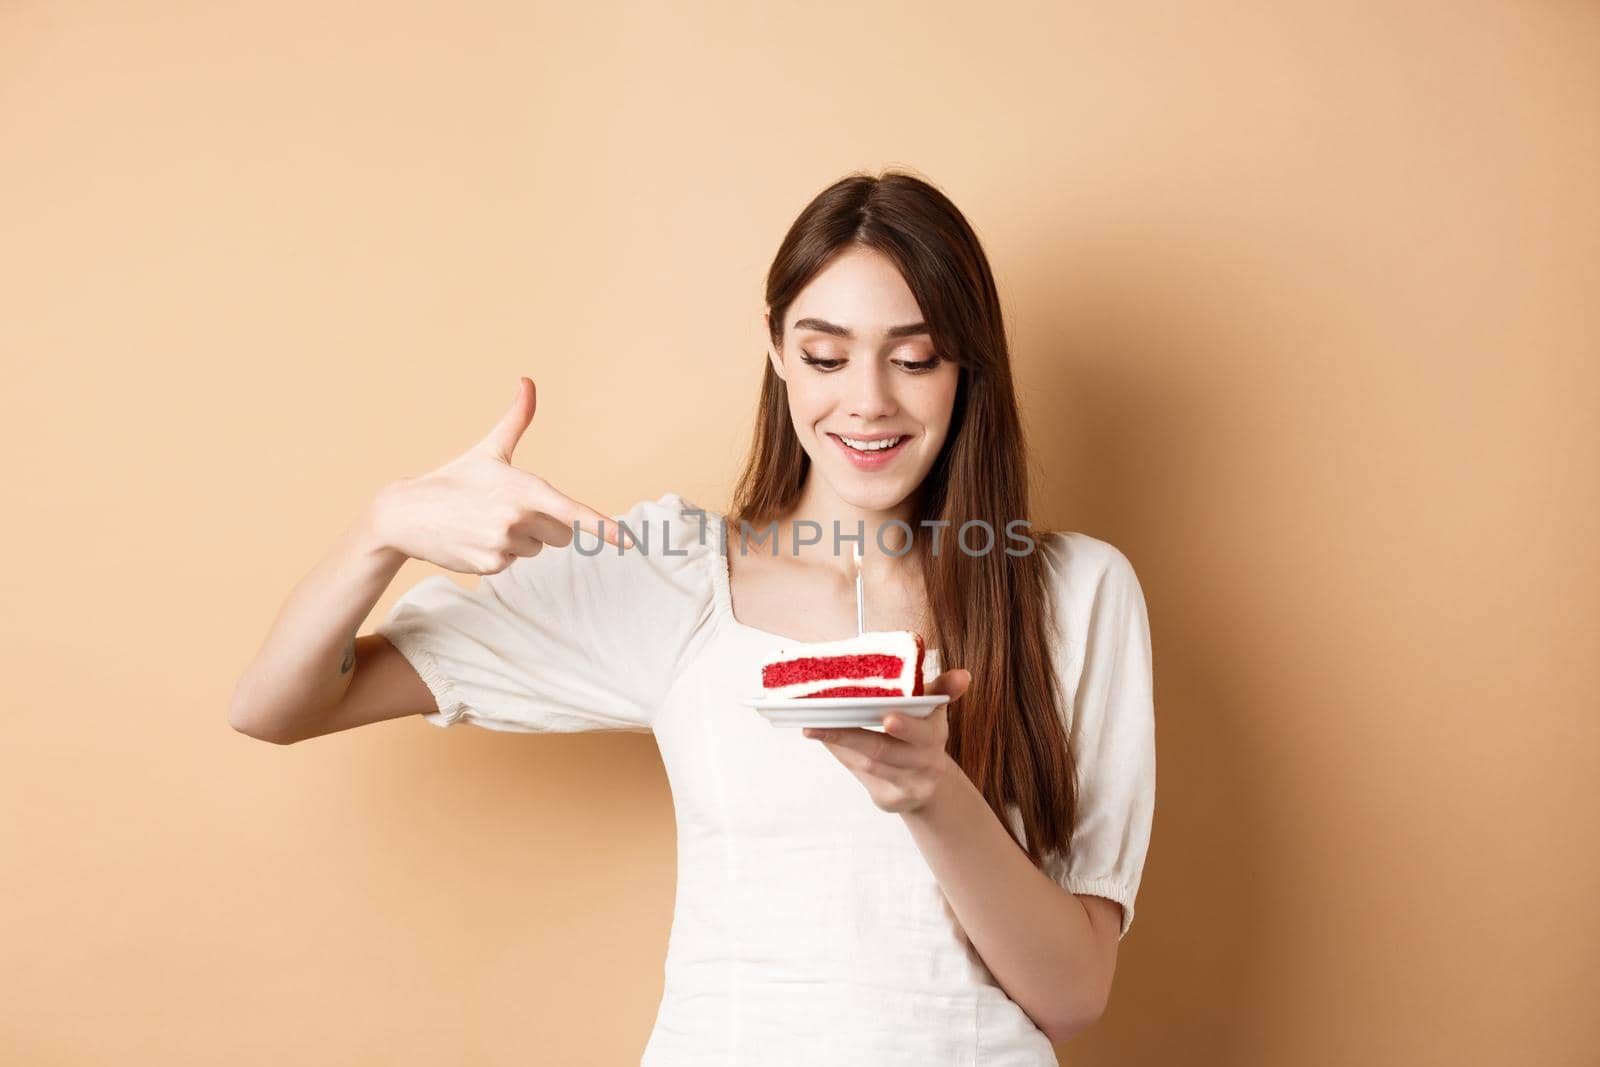 Cute girl pointing at birthday cake with candle and smiling excited, making bday wish, standing on beige background.